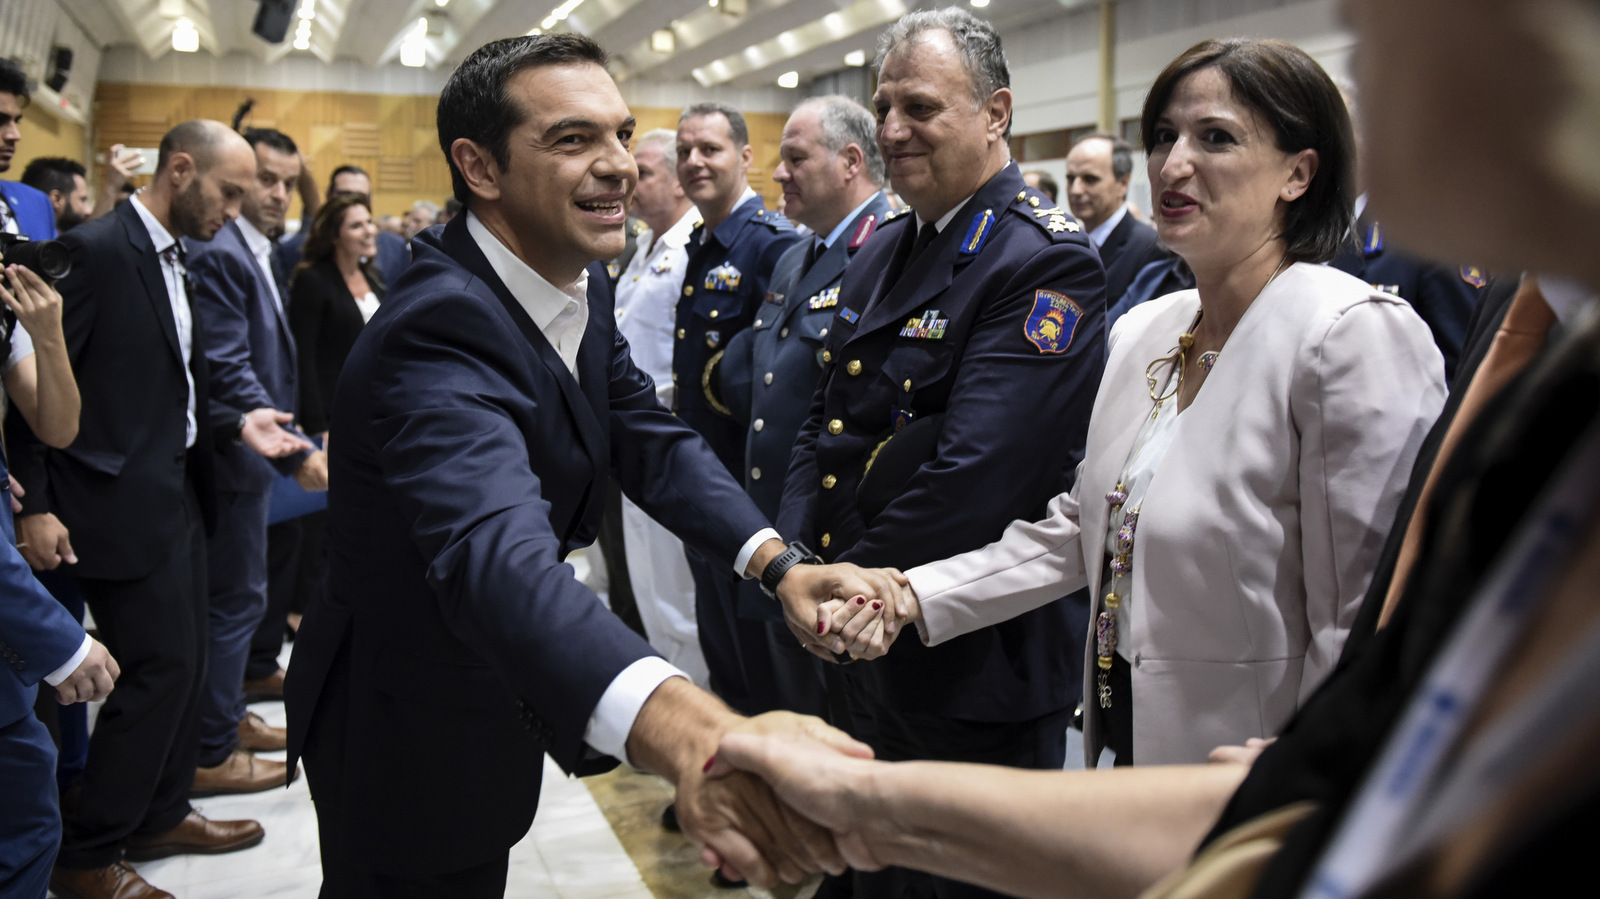 Greece's Prime Minister Alexis Tsipras greets attendants at the inauguration ceremony of Thessaloniki International Trade Fair, in Thessaloniki, Sept. 9, 2017. As the Prime Minister was delivering his speech, protesters held anti-austerity rallies outside the of the fair. (AP/Giannis Papanikos)